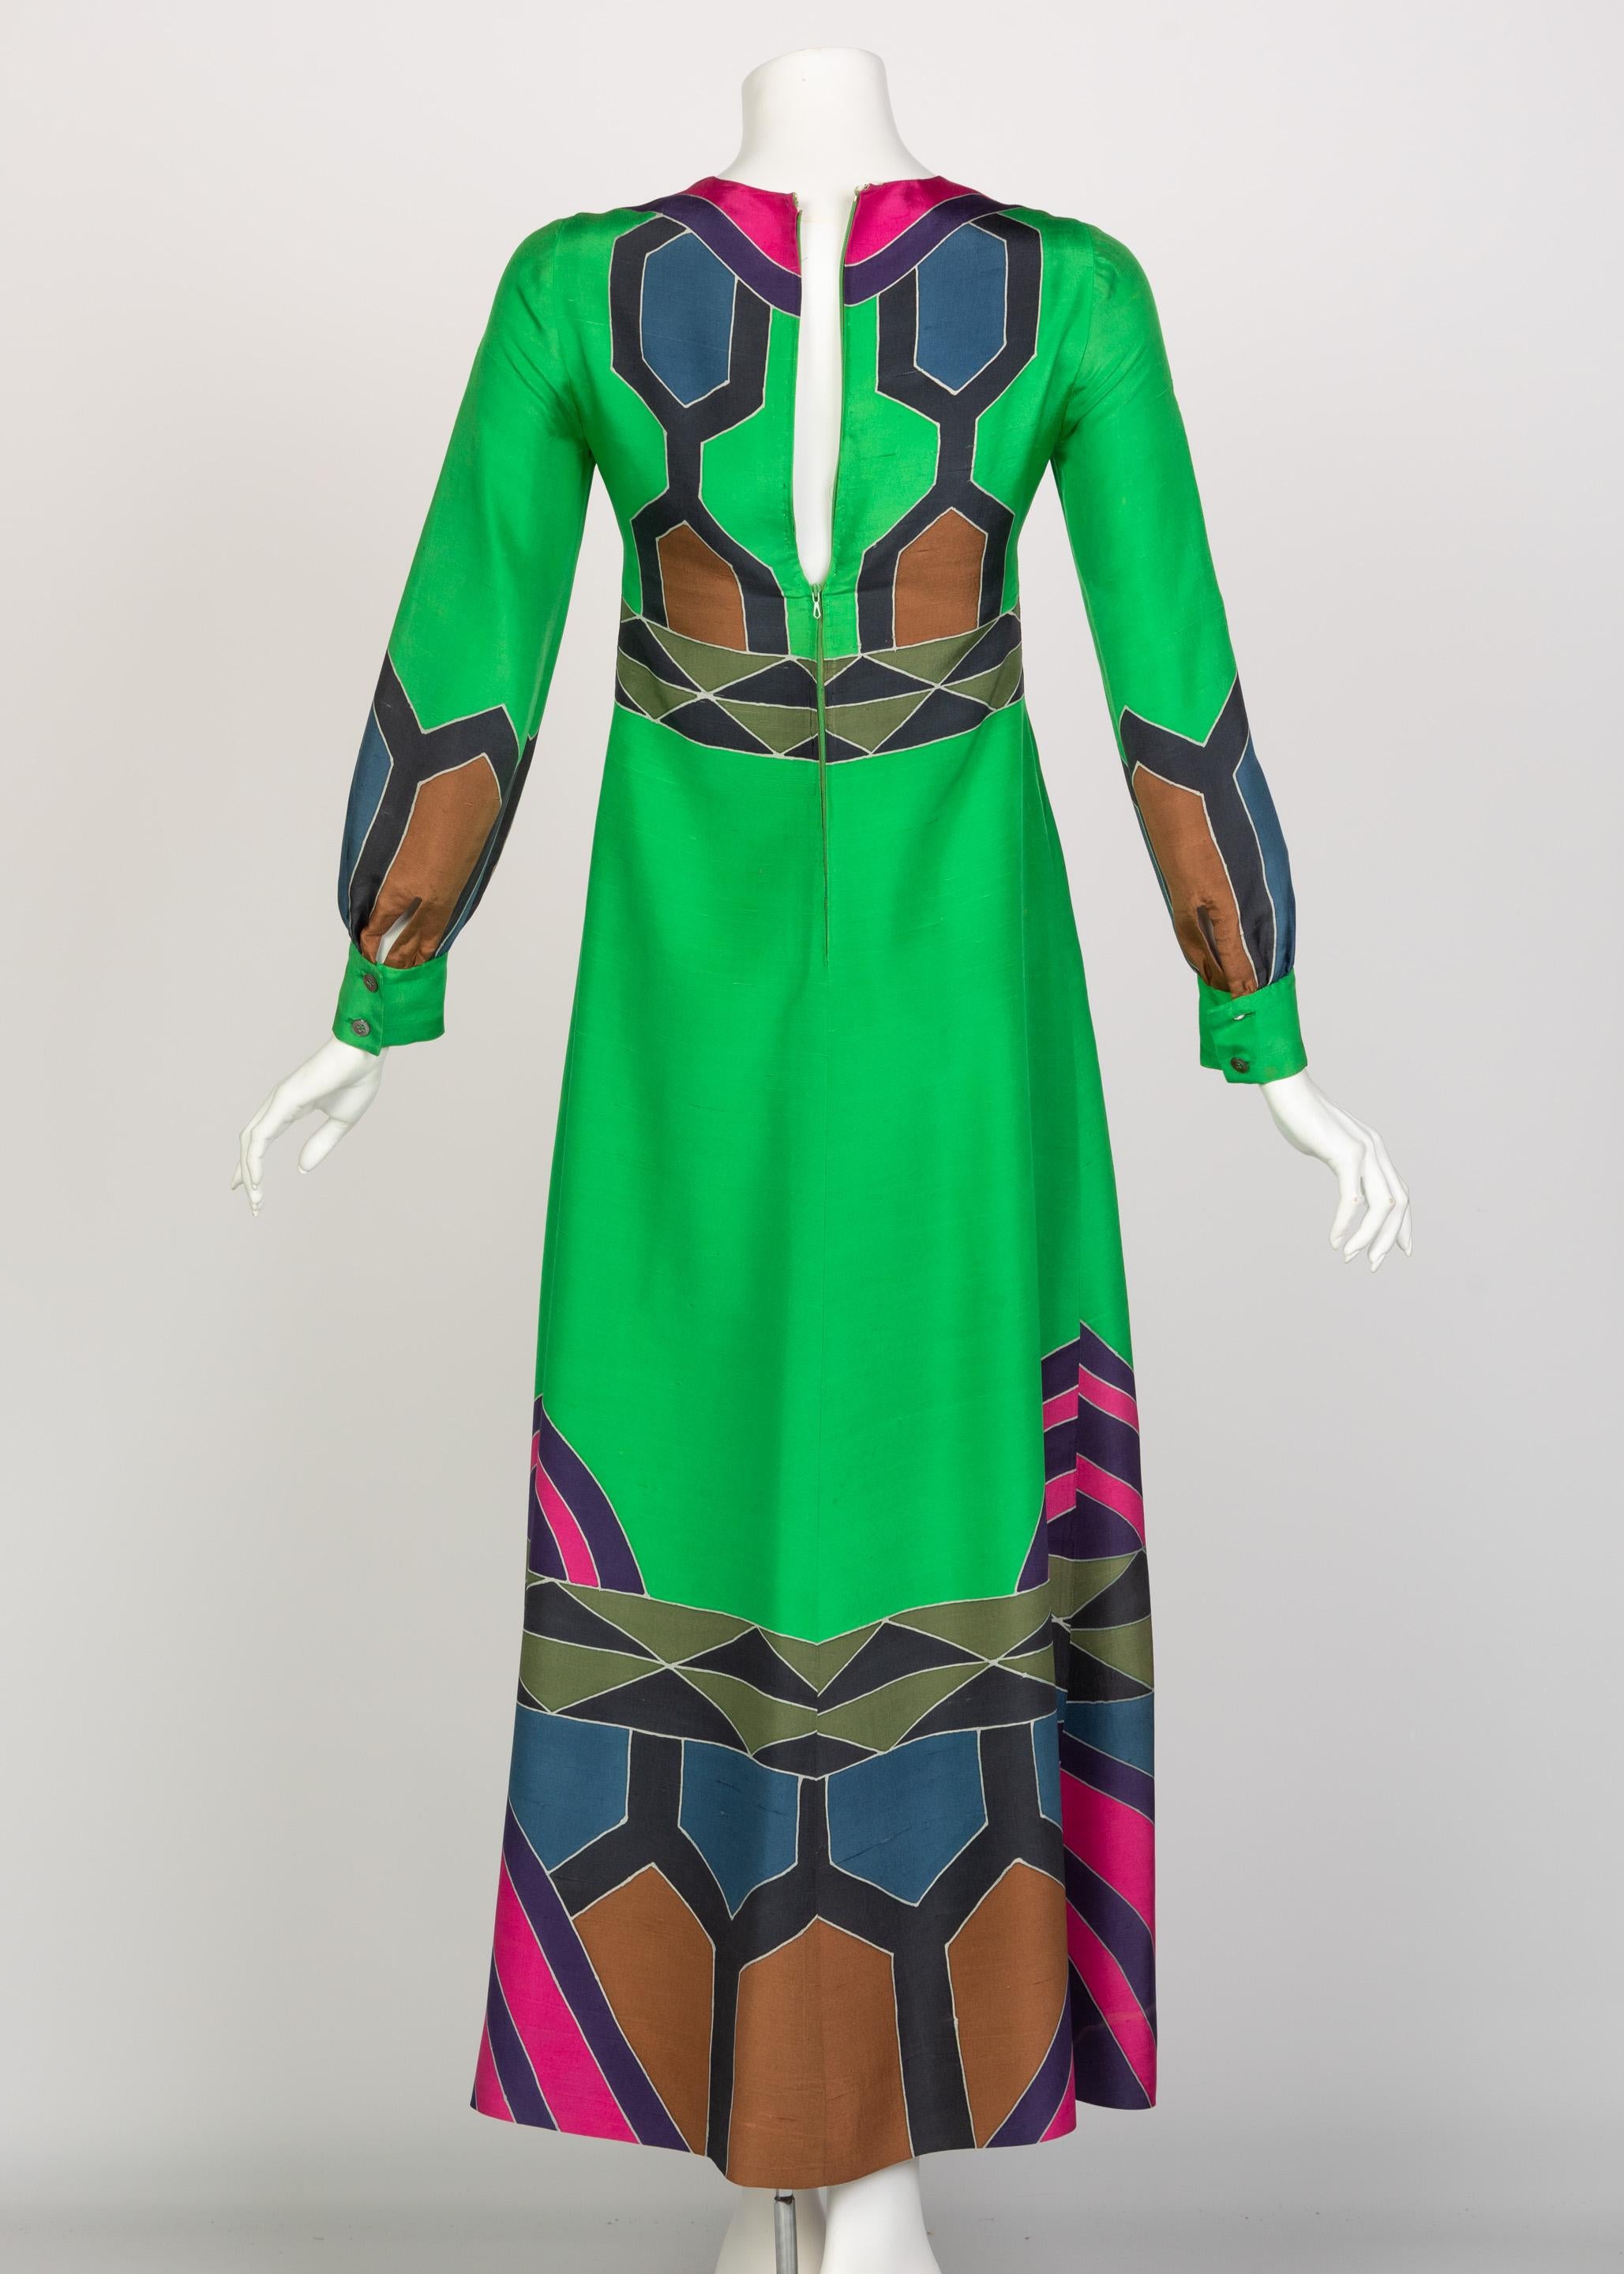 Women's Nane French Couture Hand Painted Green Silk Maxi Dress, 1970s For Sale